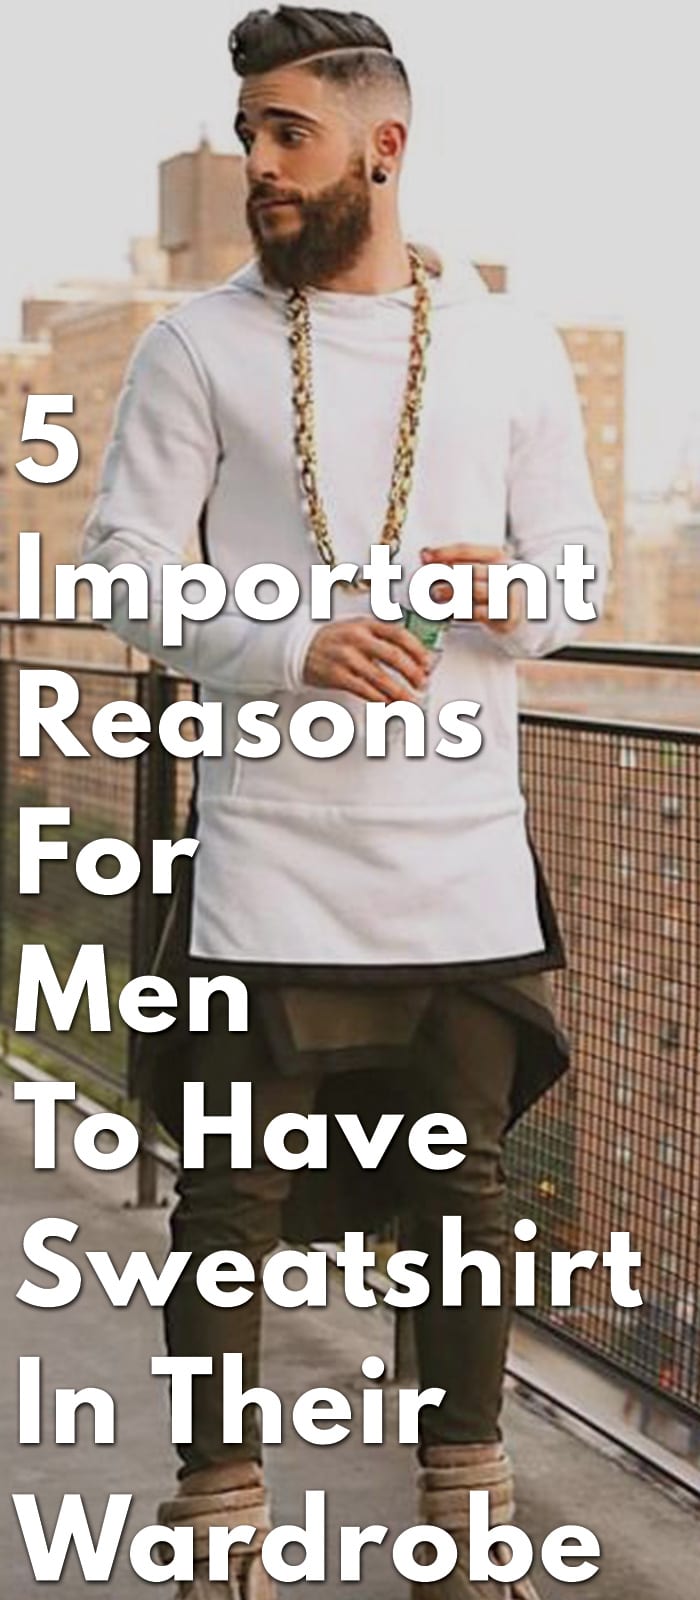 5-Important-Reasons-For-Men-To-Have-Sweatshirt-In-Their-Wardrobe